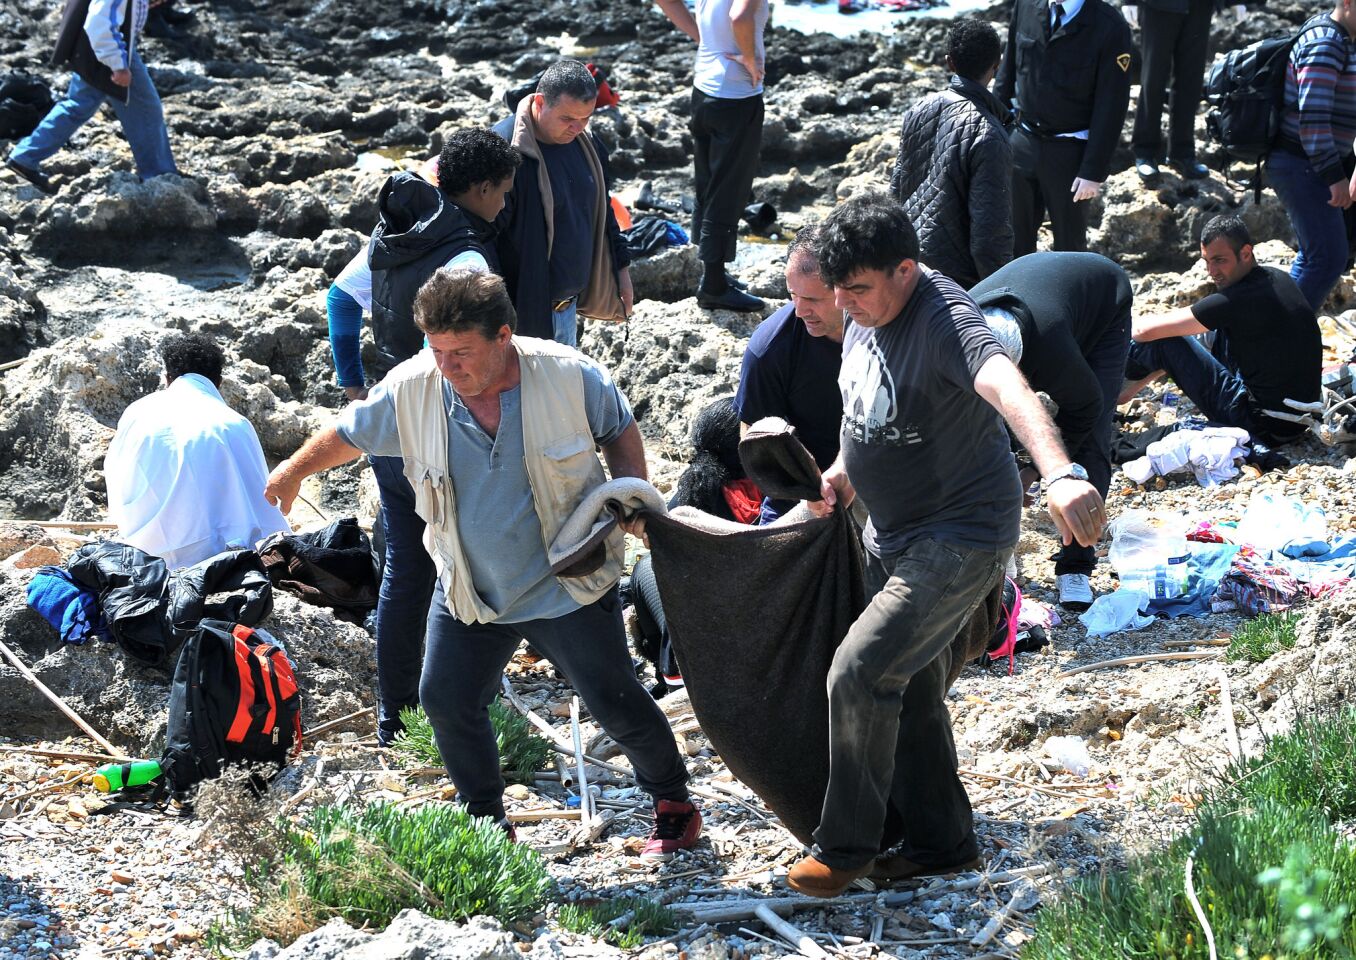 Men carry a dead body inside a blanket on the shore in the eastern Aegean island of Rhodes, Greece. Authorities said that at least three people have died, including a child, after a wooden boat carrying many migrants ran aground off the island of Rhodes.